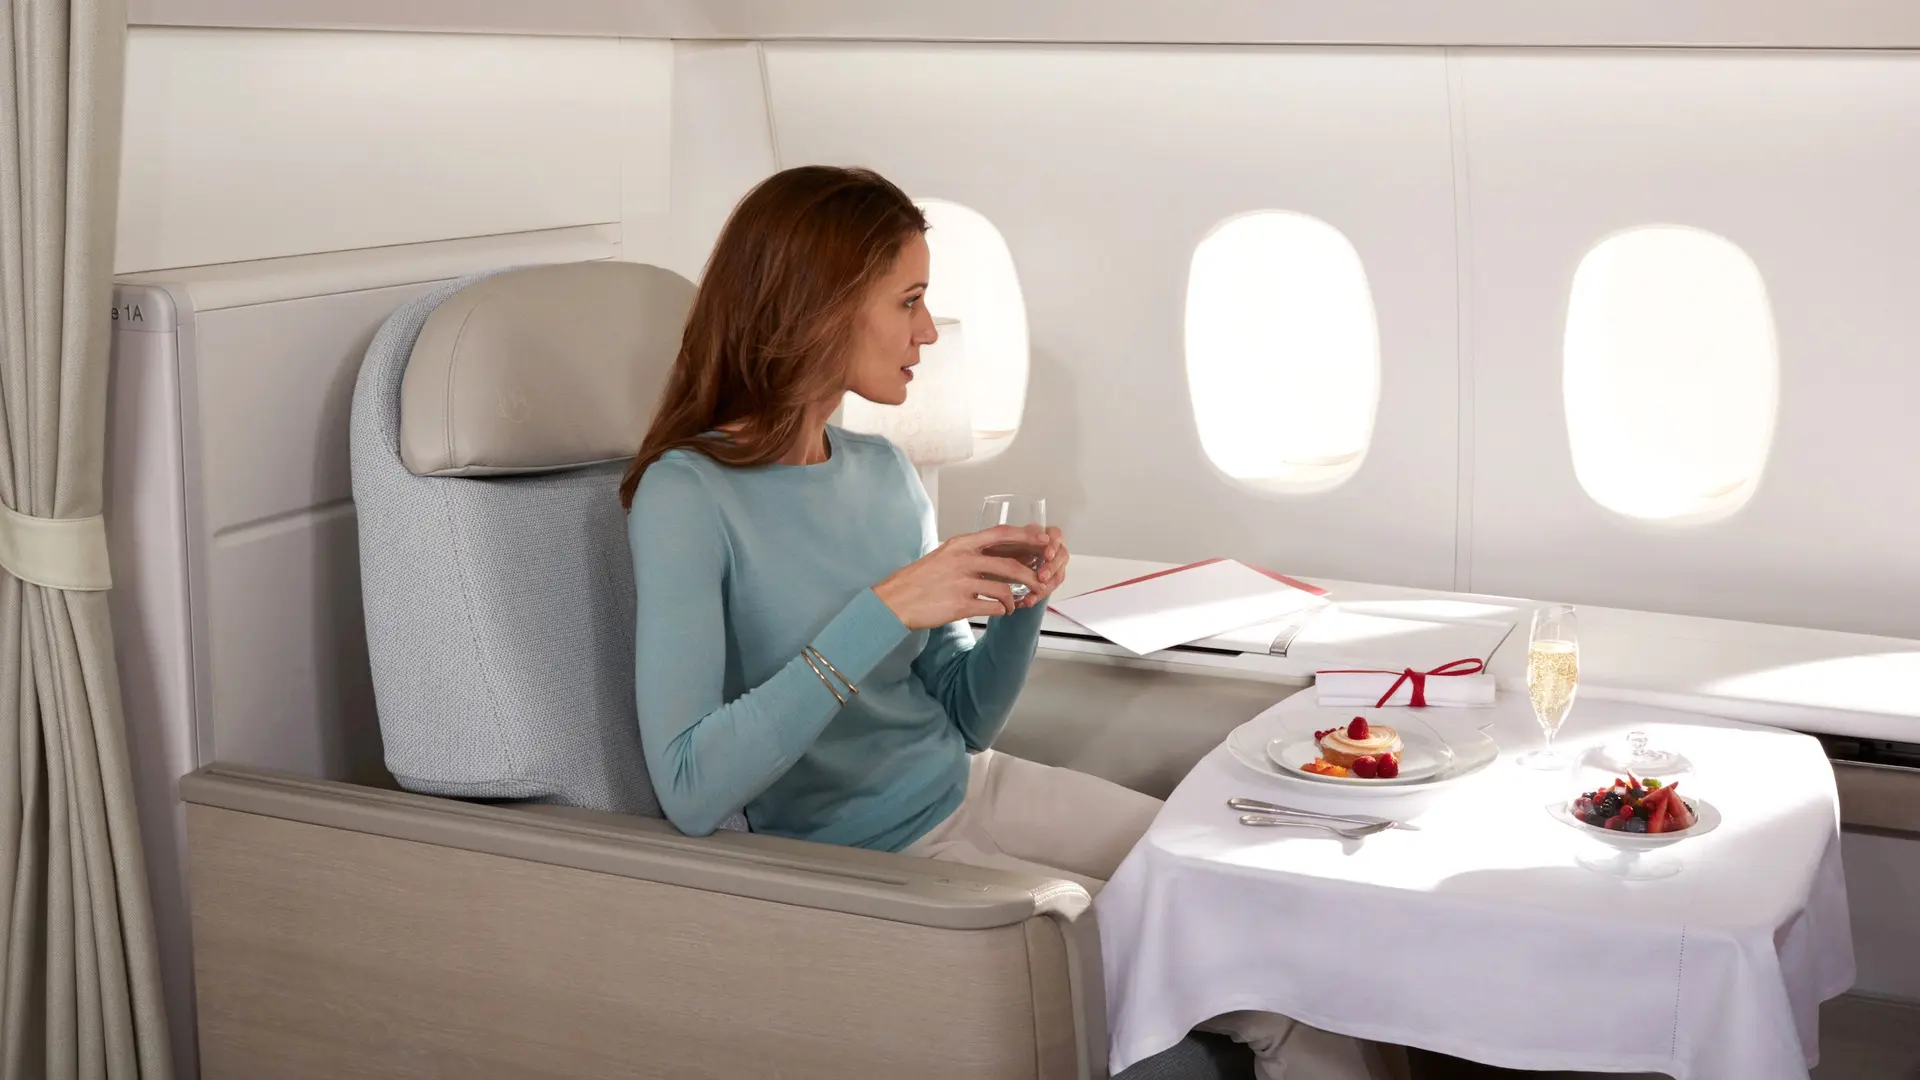 Airlines News - Air France takes premium dining to new heights